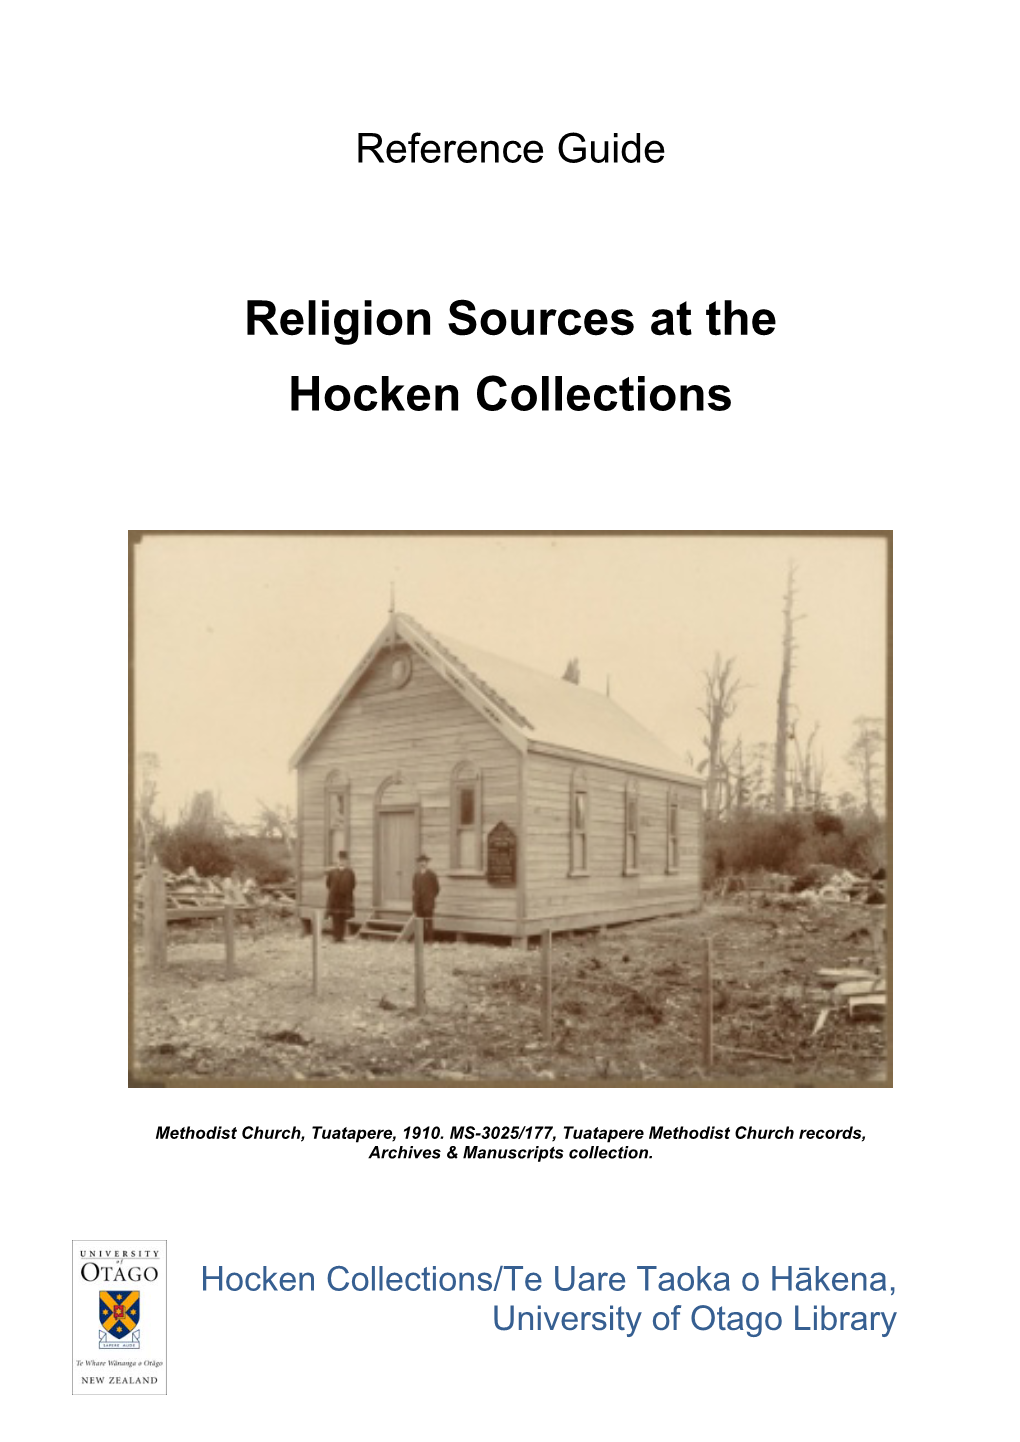 Religion Sources at the Hocken Collections